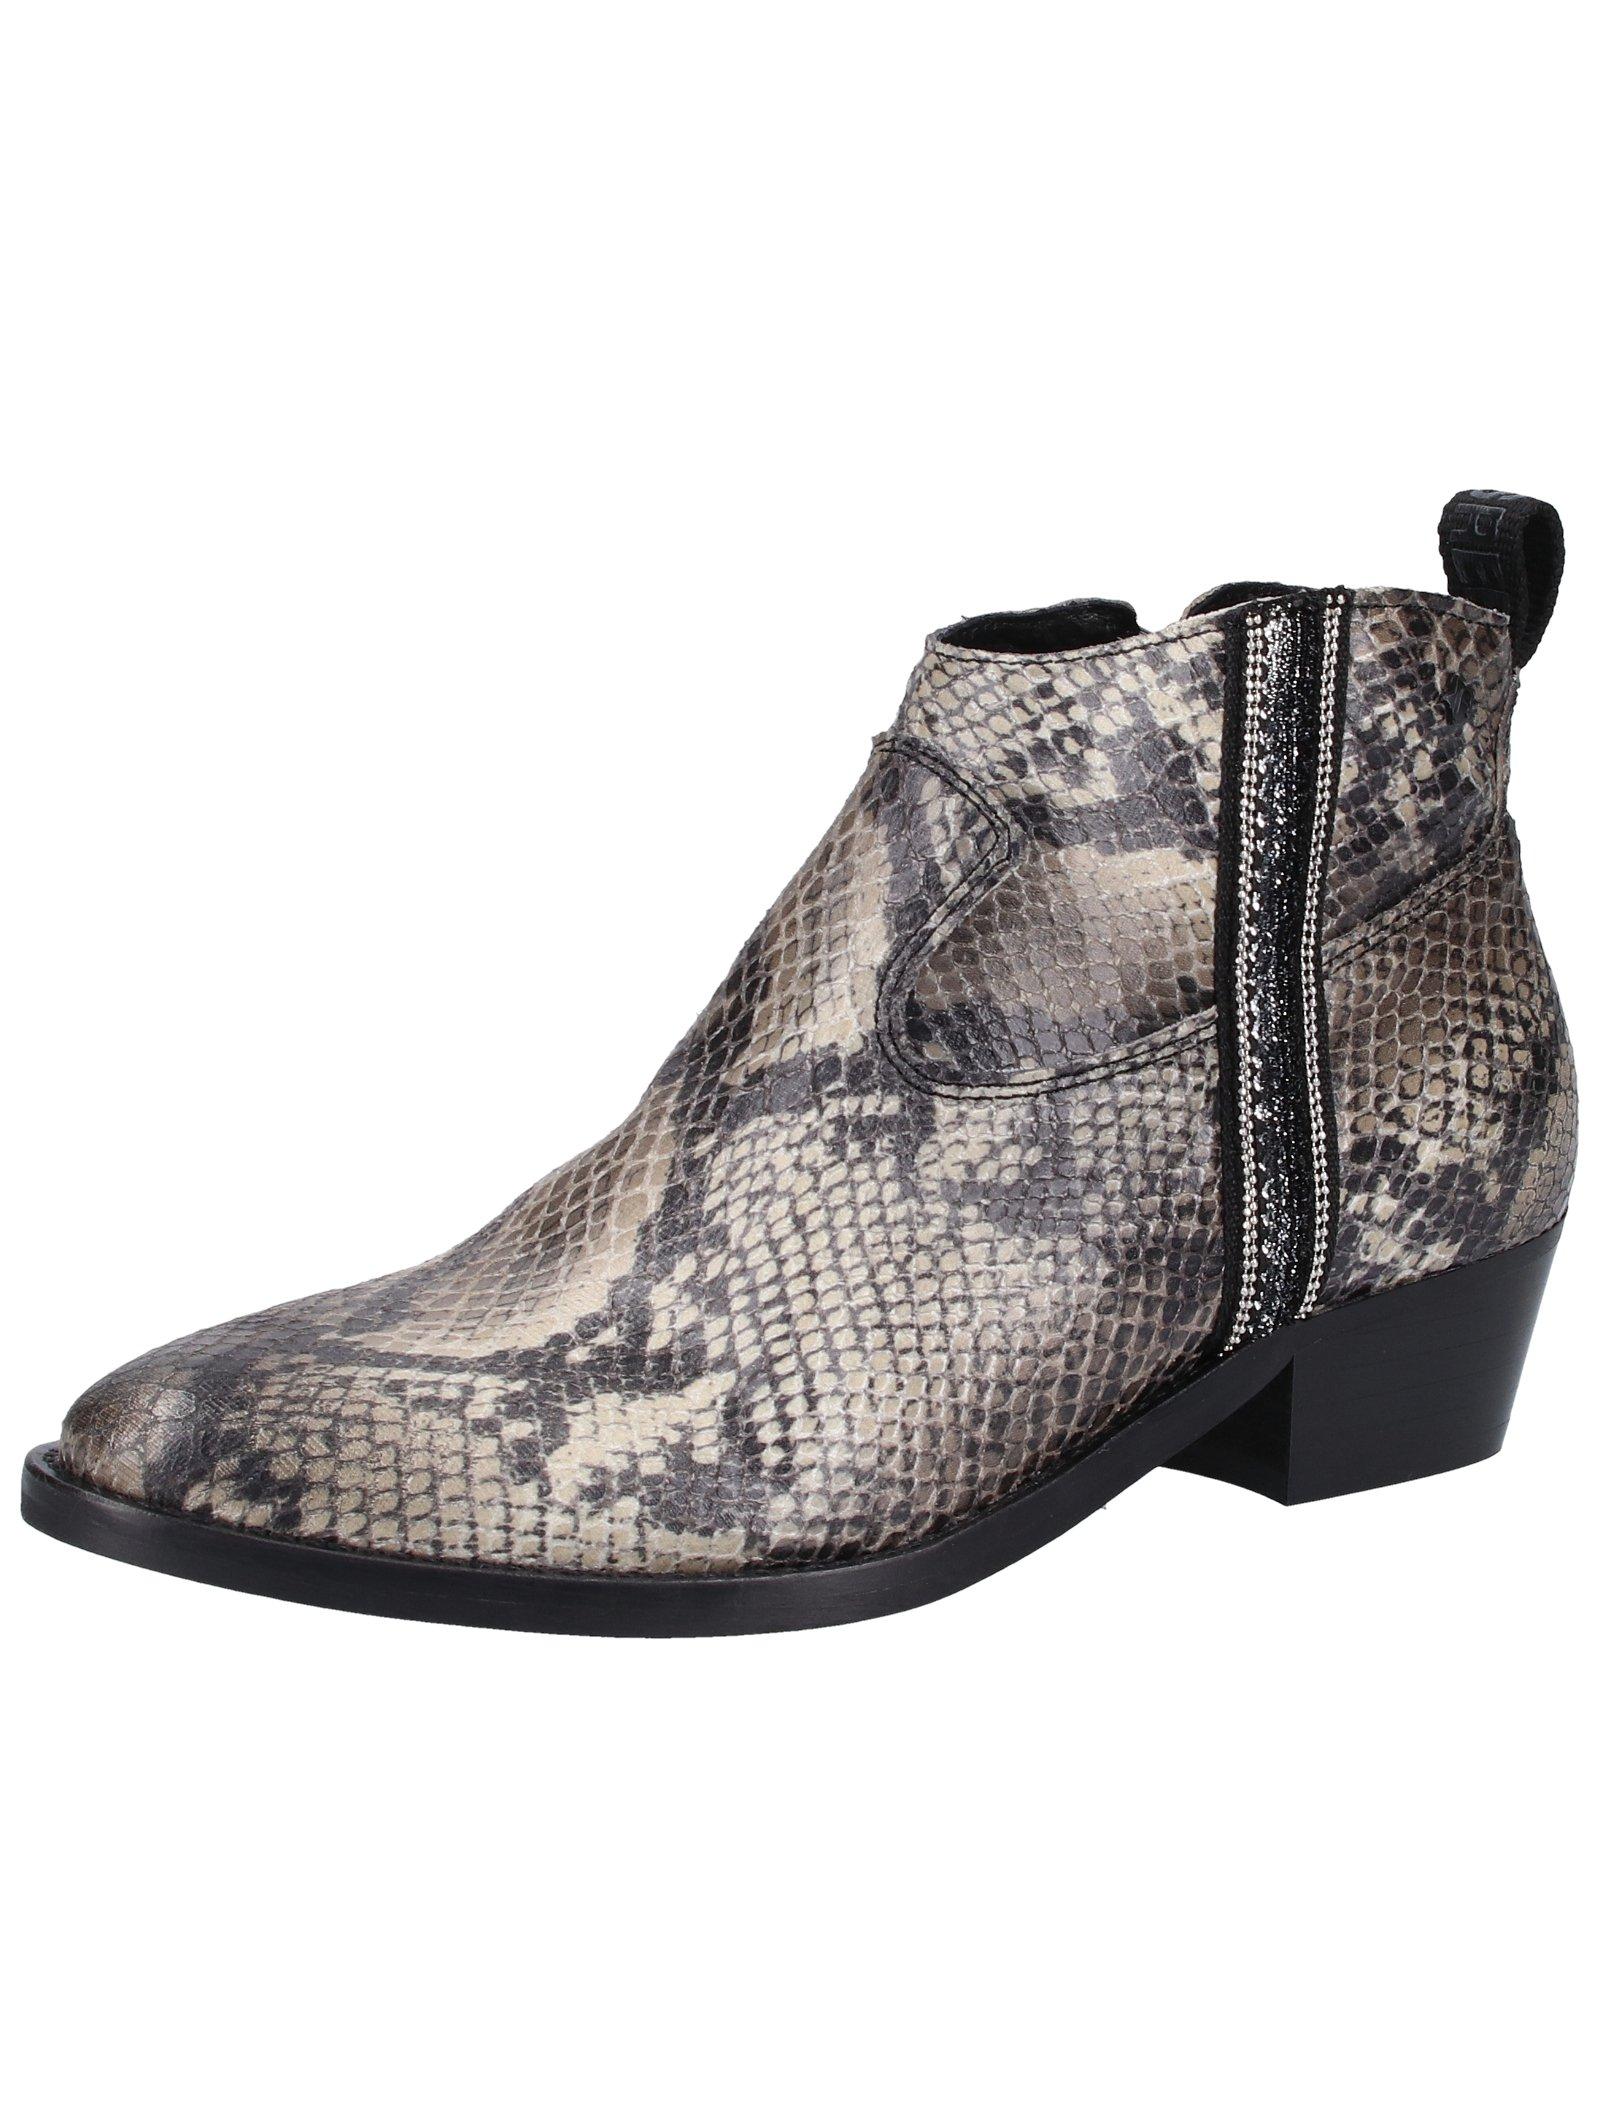 REPLAY  Stiefelette GWN57.000.C0001S 